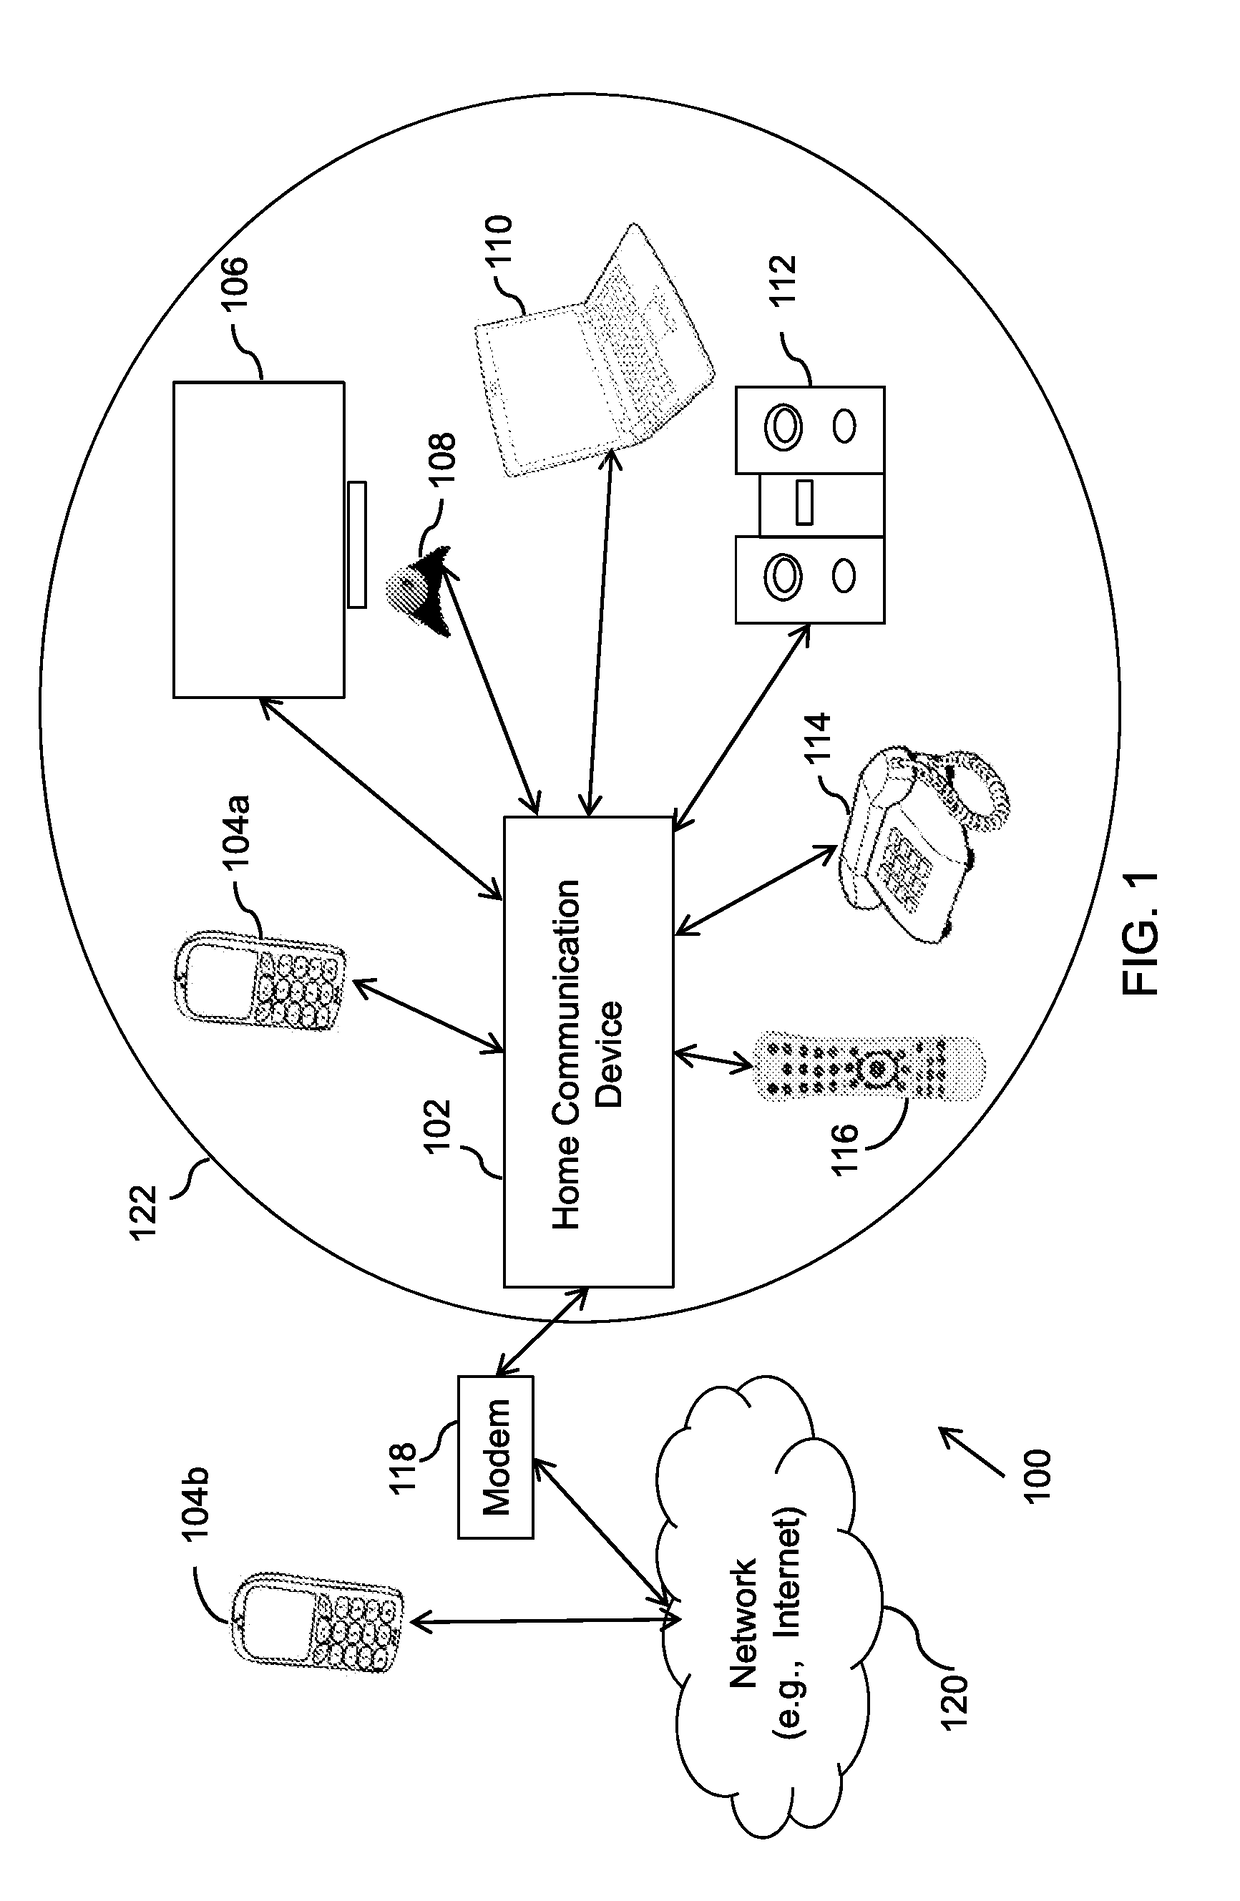 Methods and Apparatus for Interactive Multimedia Communication